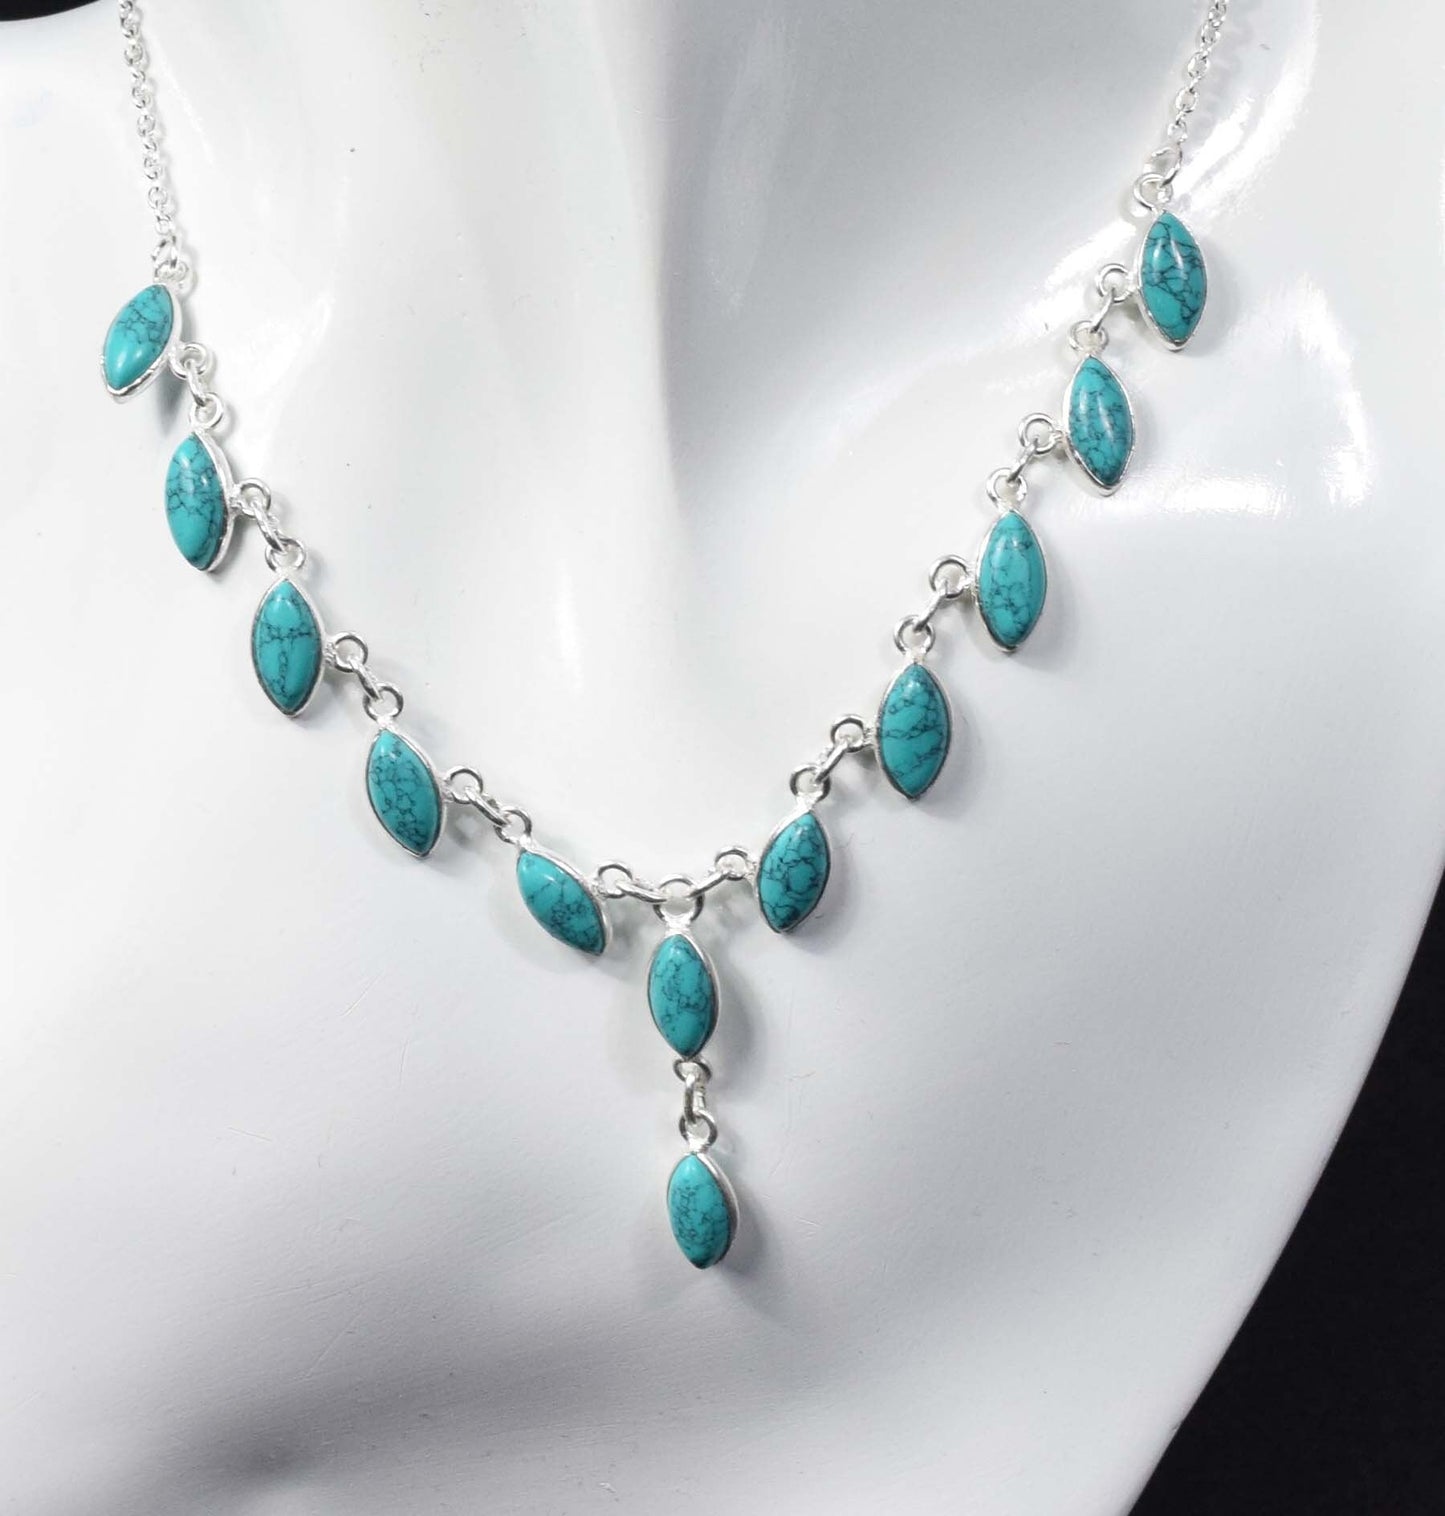 Blue Turquoise 925 Sterling Silver Gemstone Necklace Jewelry ~ December Month Birthstone ~ Turquoise Designer Necklace ~ Gift For Birthday